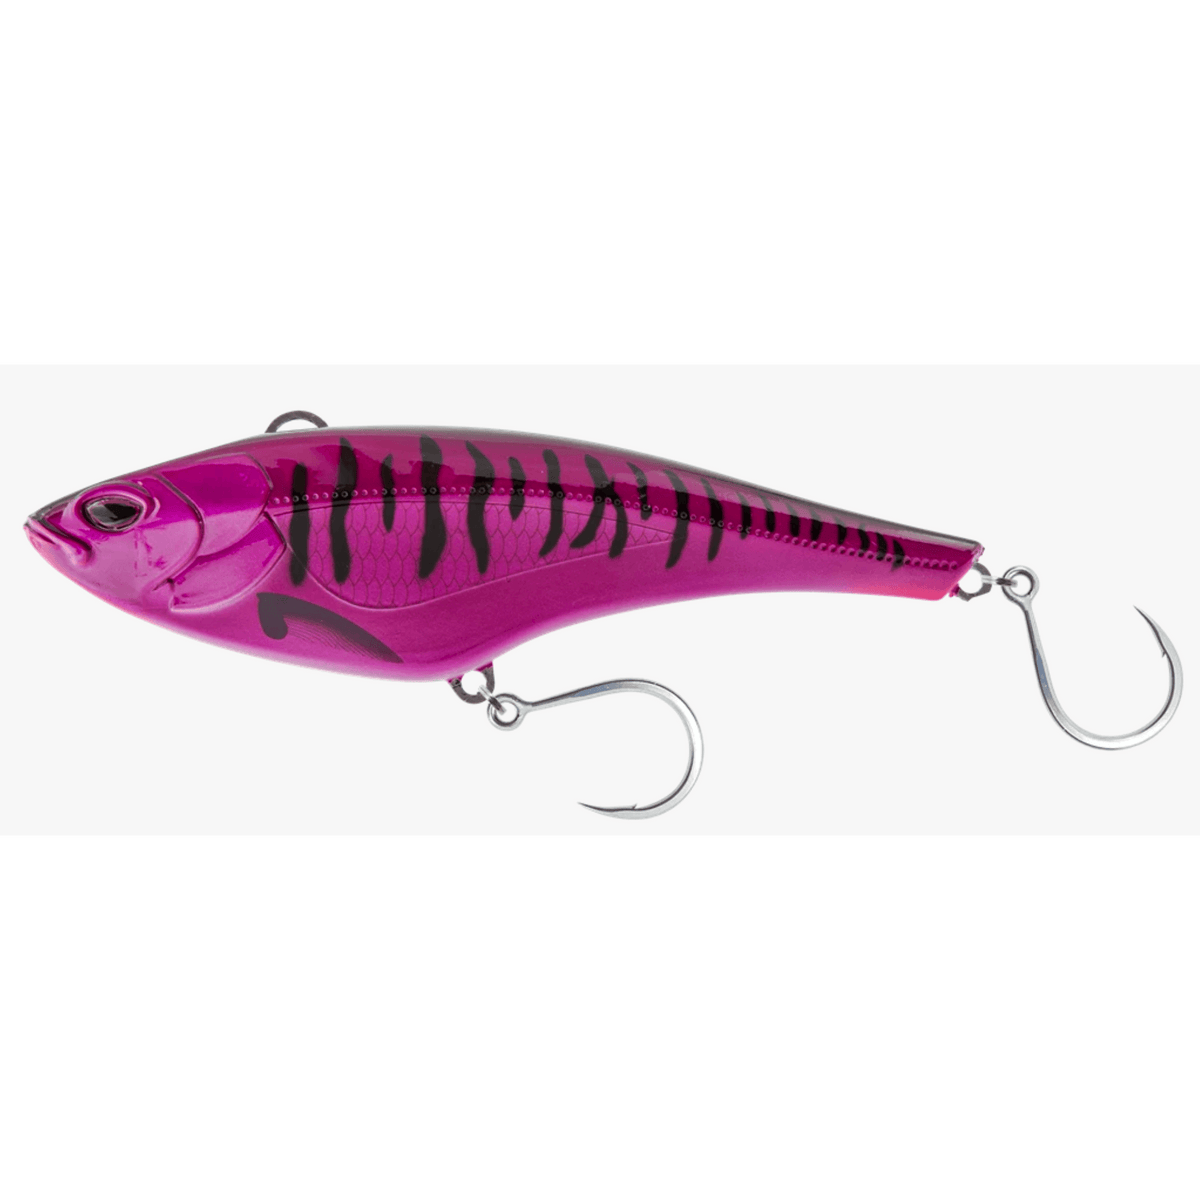 Fishing Lures for Sale - #1 for fishing lures in Australia Page 2 - Addict  Tackle